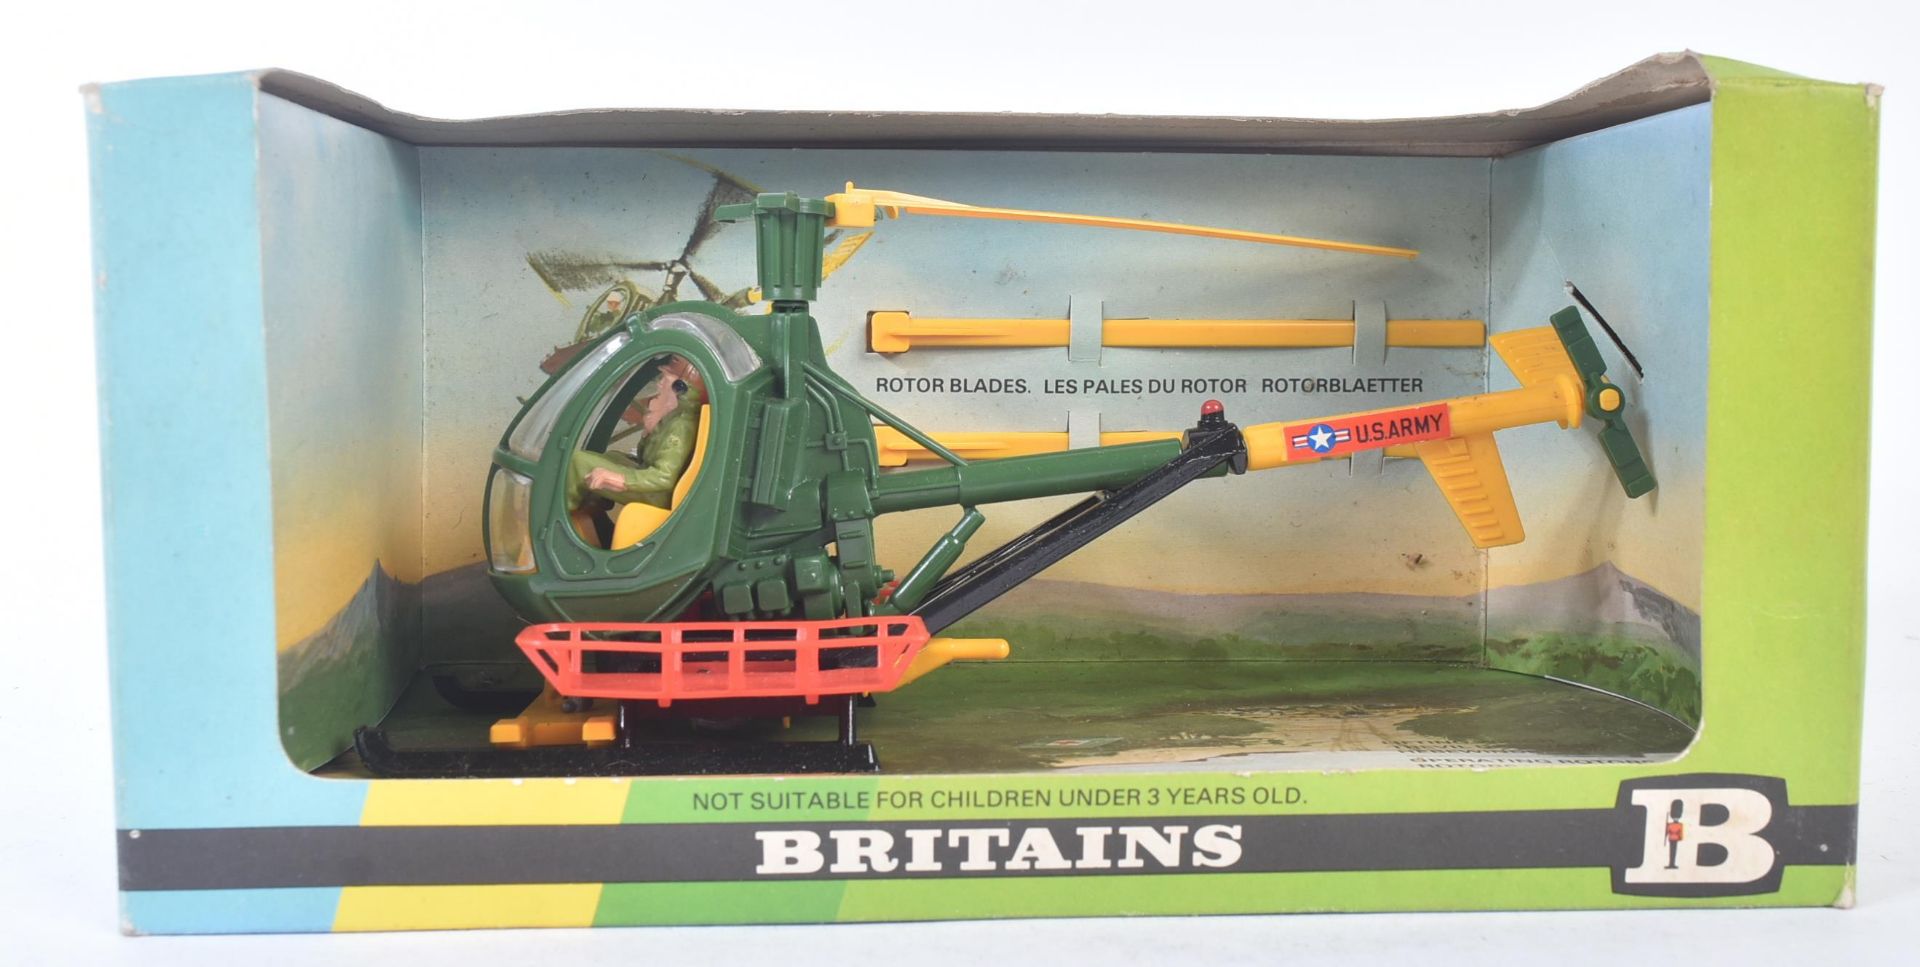 VINTAGE BRITAINS 1/32 SCALE DIECAST HUGHES 300C RESCUE HELICOPTER